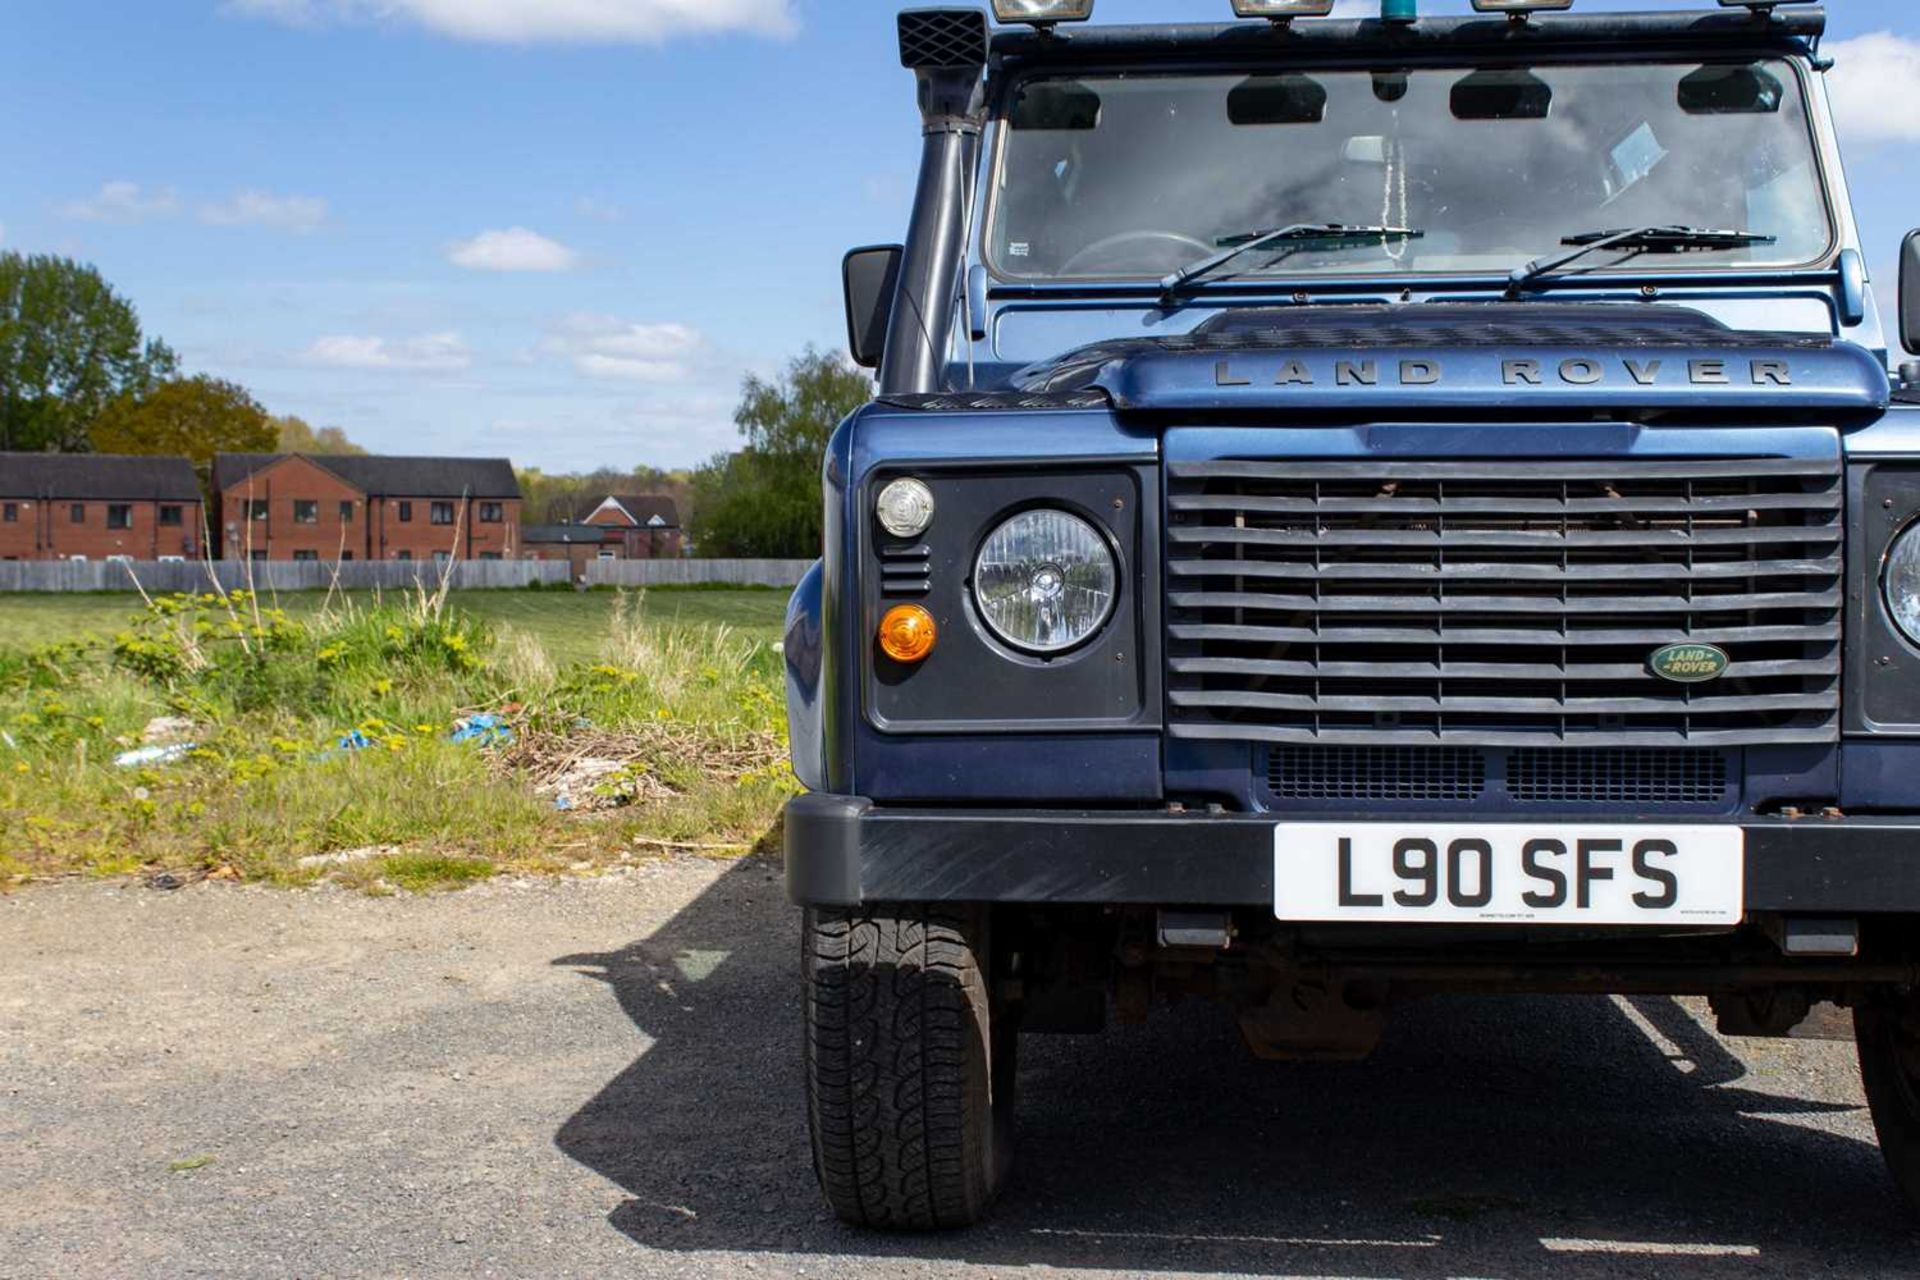 2007 Land Rover Defender 90 County  Powered by the 2.4-litre TDCi unit and features numerous tastefu - Image 2 of 76